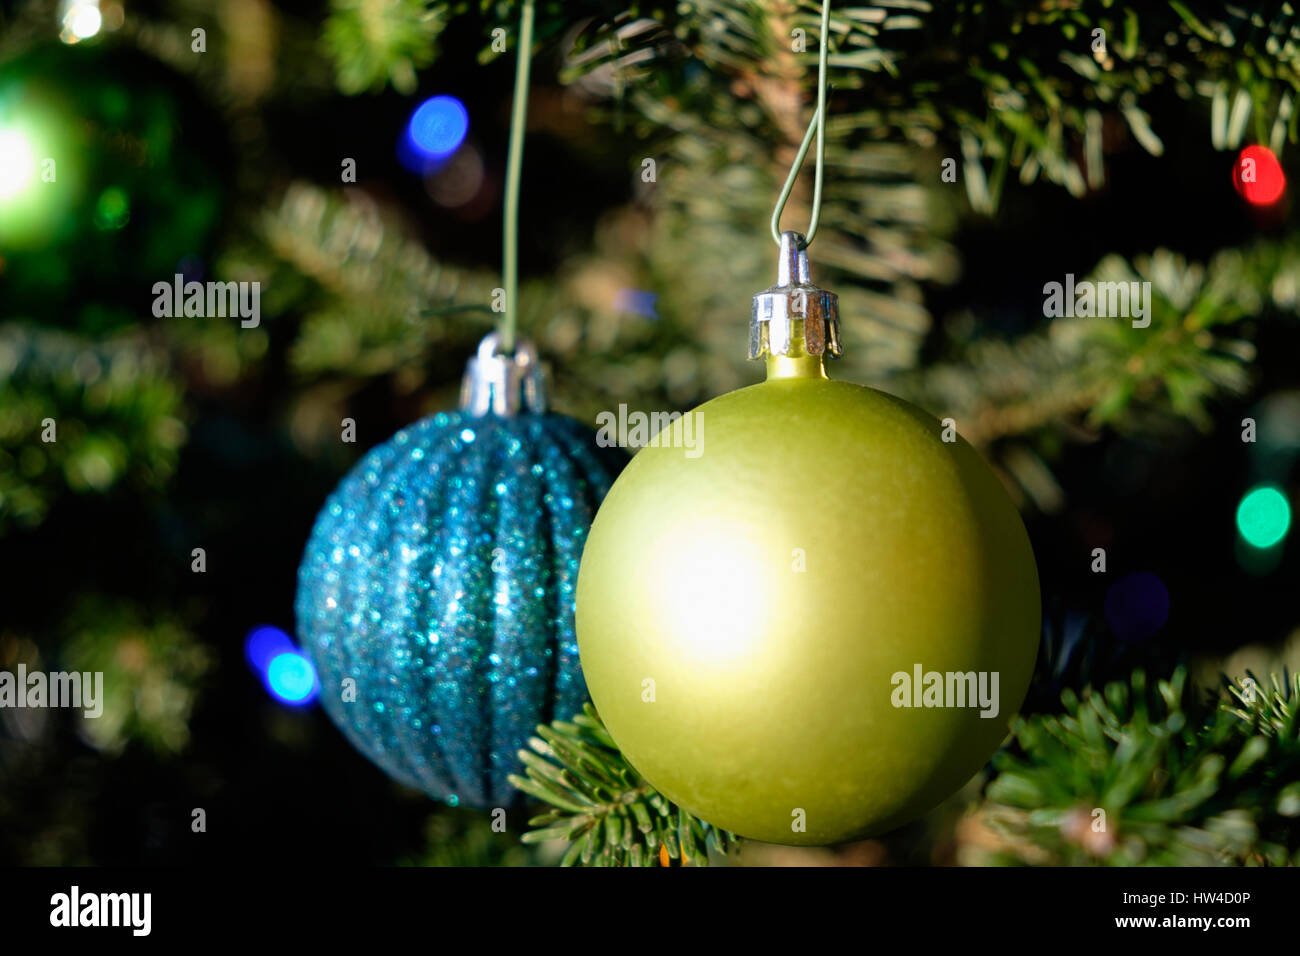 Blue and green ornaments hanging on Christmas tree Stock Photo